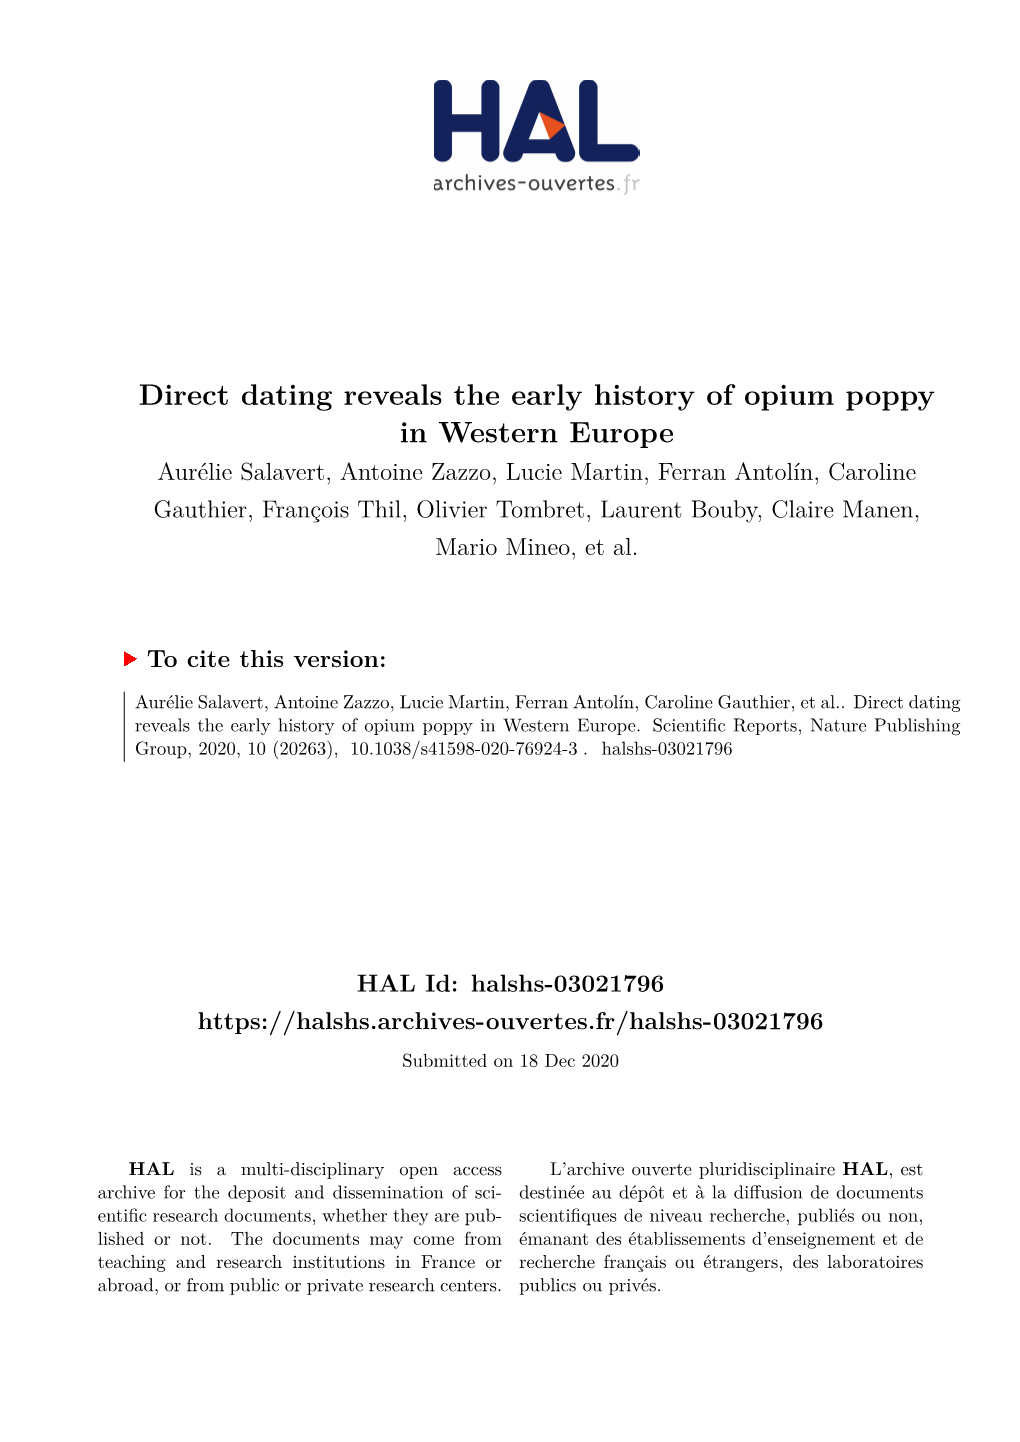 Direct Dating Reveals the Early History of Opium Poppy in Western Europe